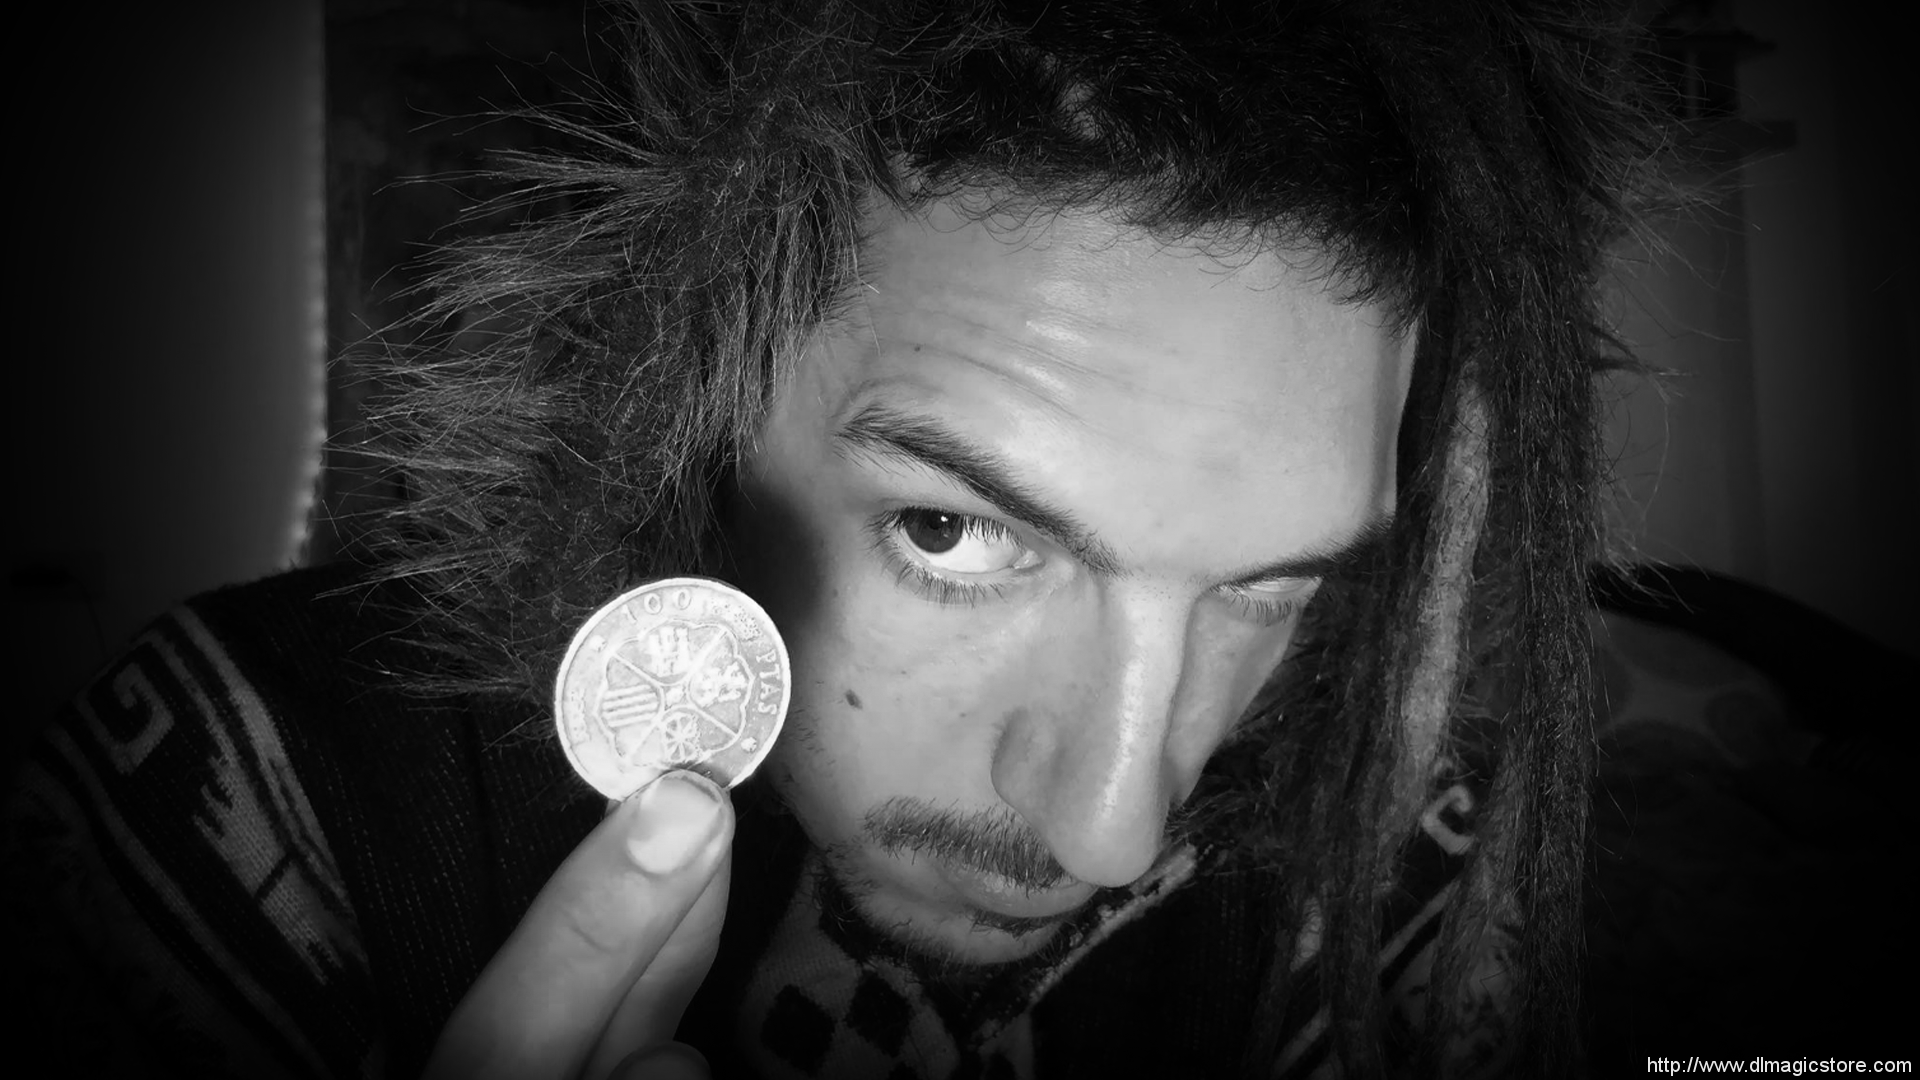 One Coin: Vol.6 – Juan Colás – The Impossible Co.